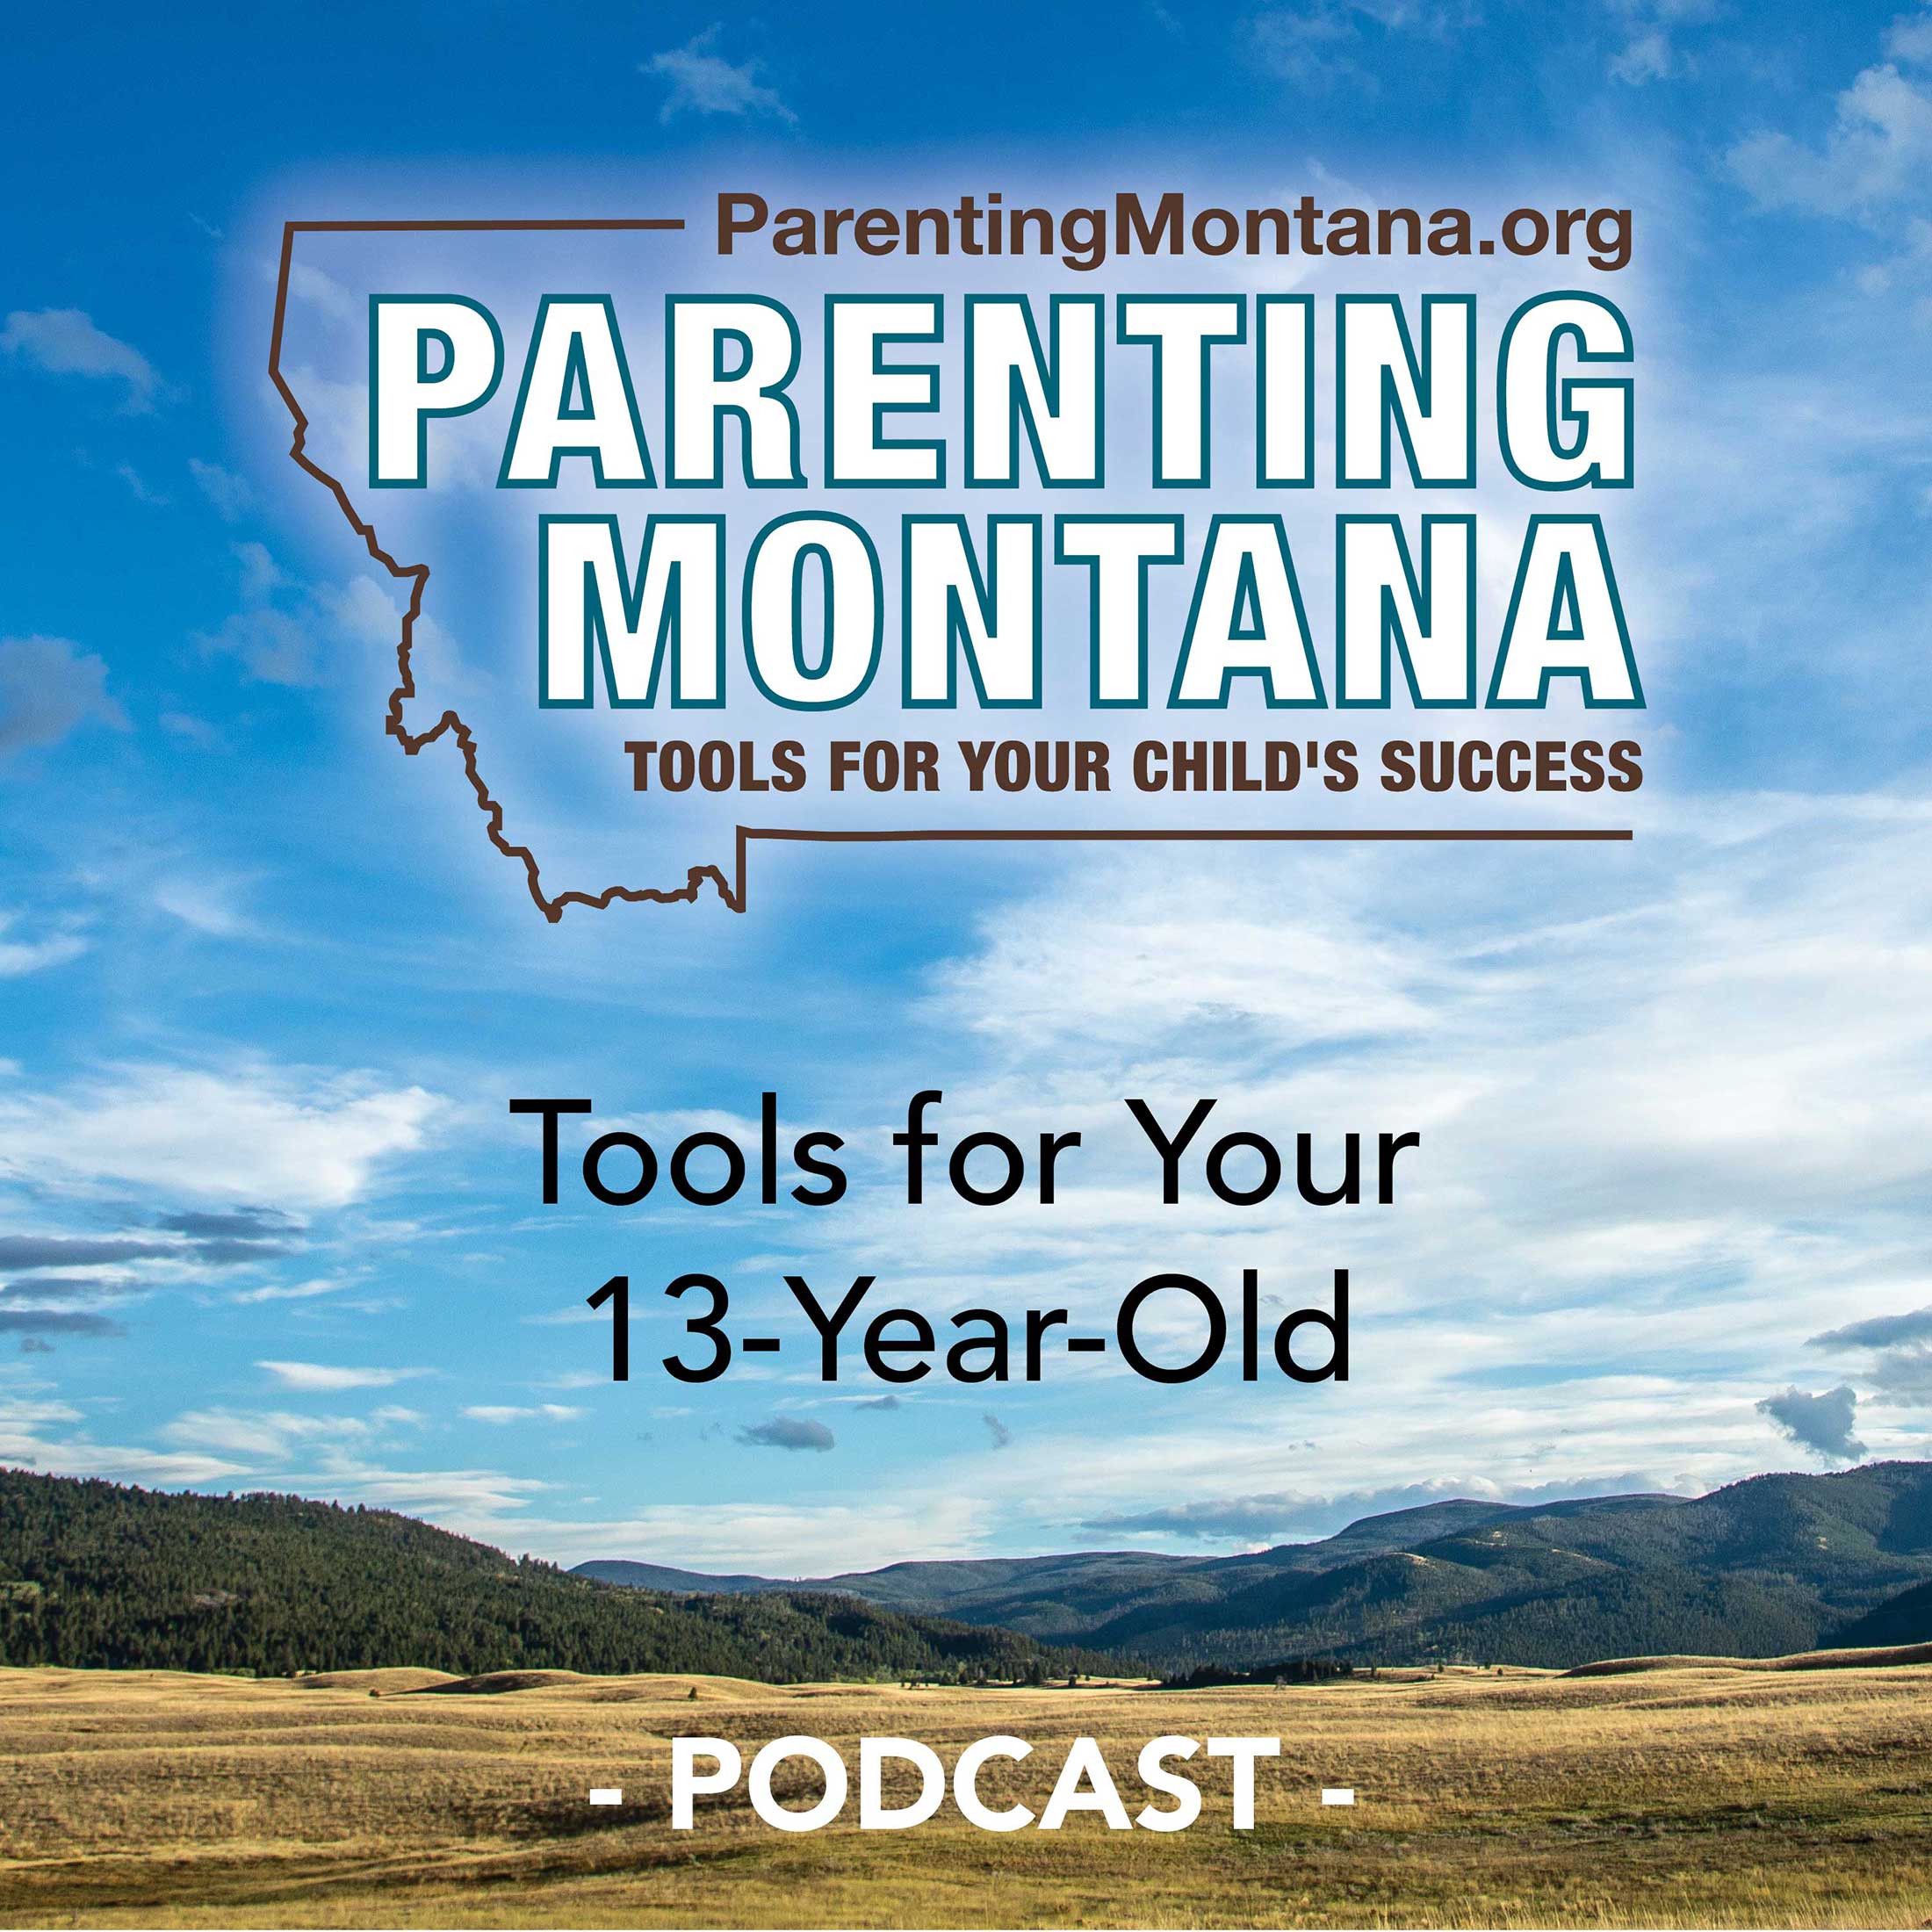 Artwork for podcast 13-Year-Old Parenting Montana Tools